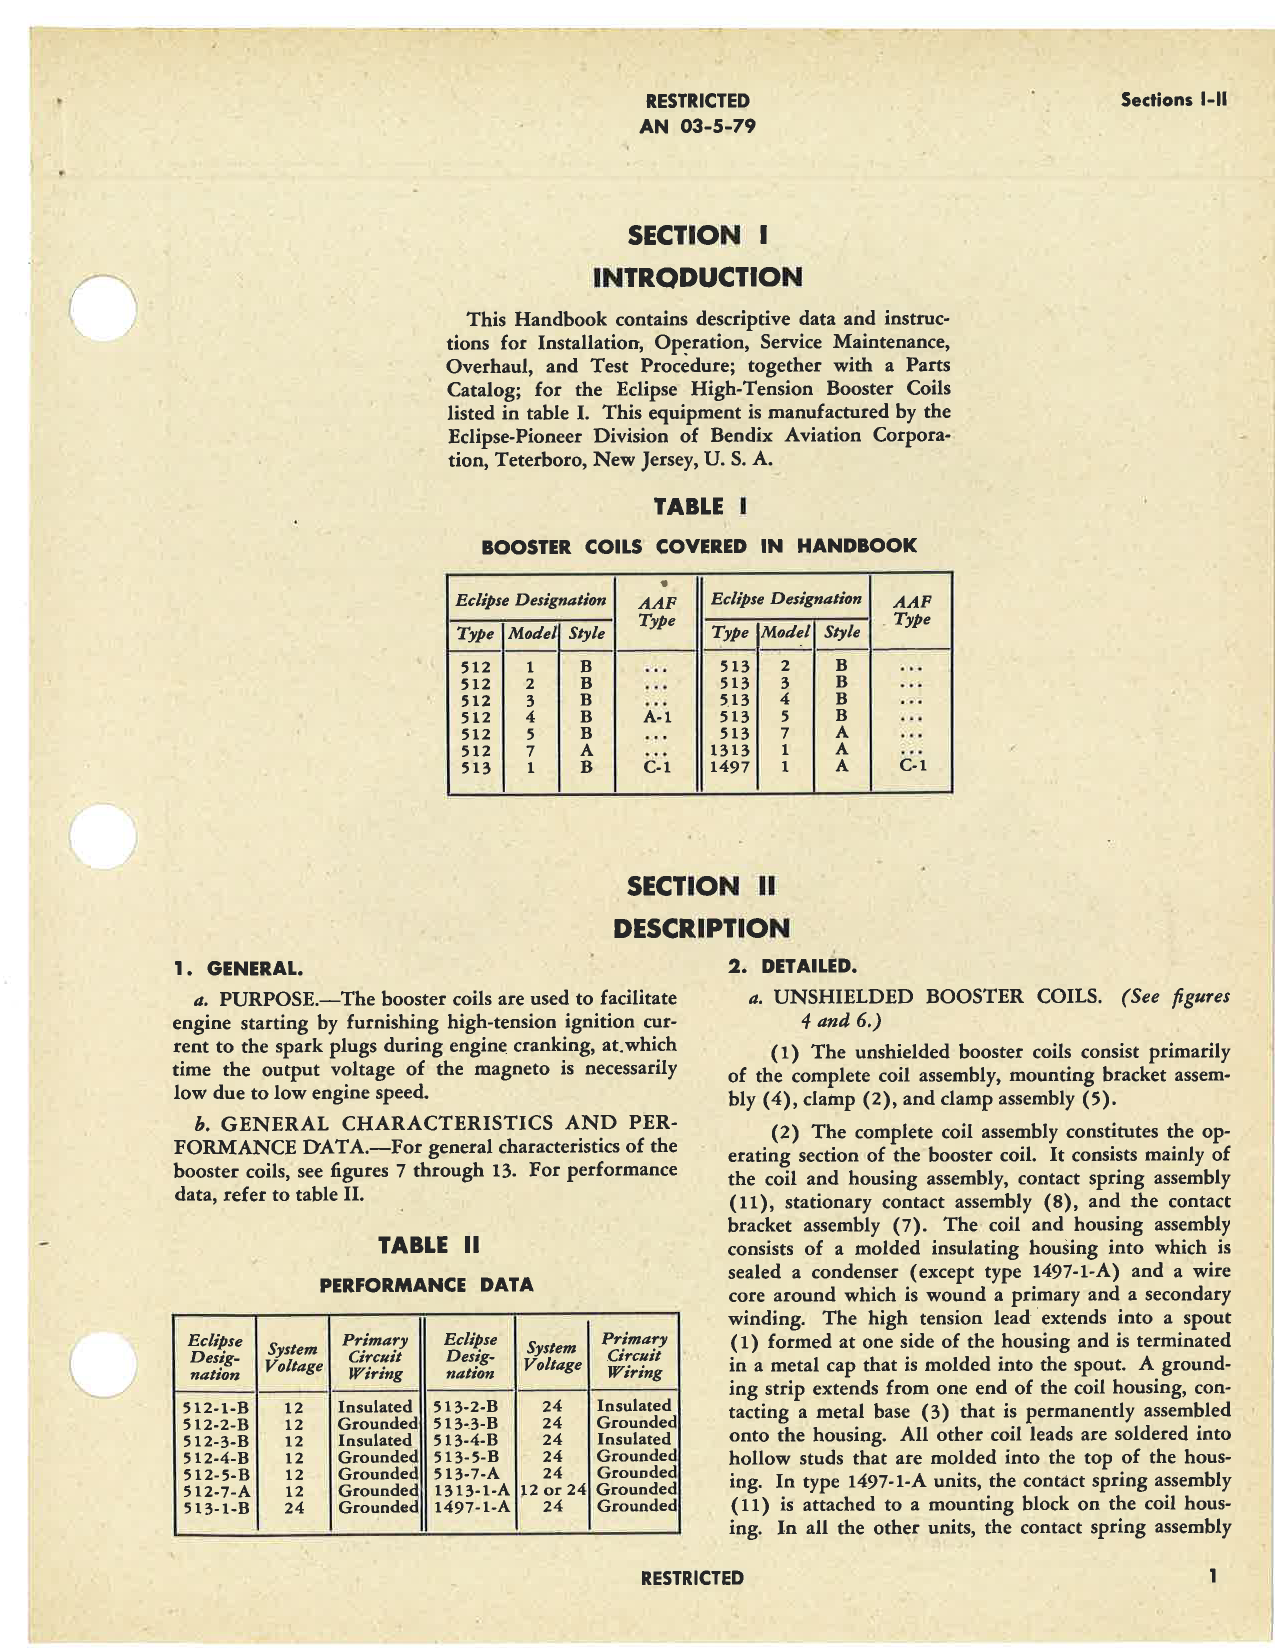 Sample page 5 from AirCorps Library document: Operation, Service & Overhaul Instructions with Parts Catalog for High Tension Booster Coils